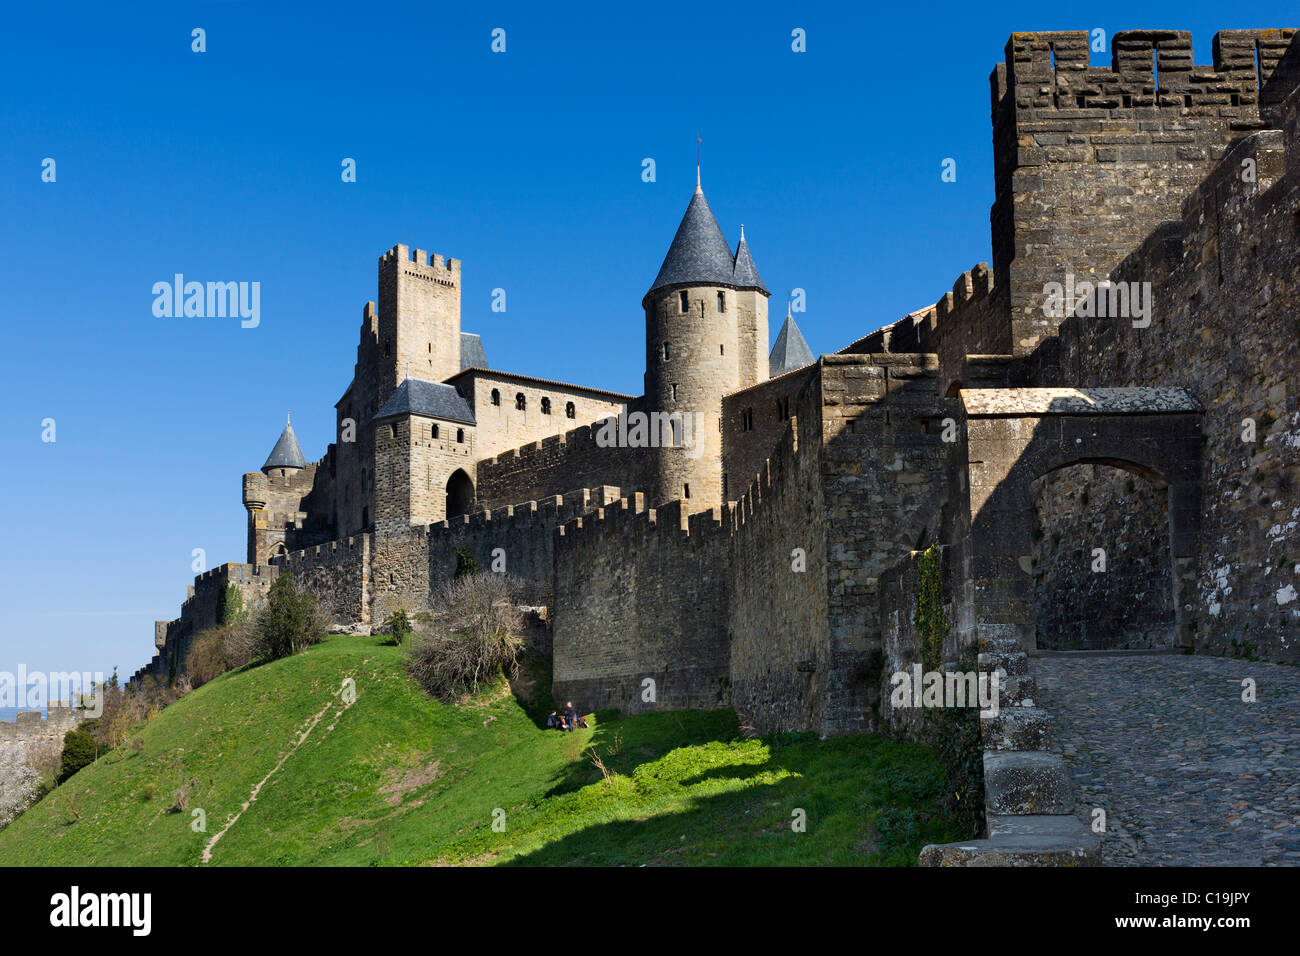 The Porte de l'Aude and the Chateau Comtal in the medieval walled city (Cite) of Carcassonne, Languedoc, France Stock Photo